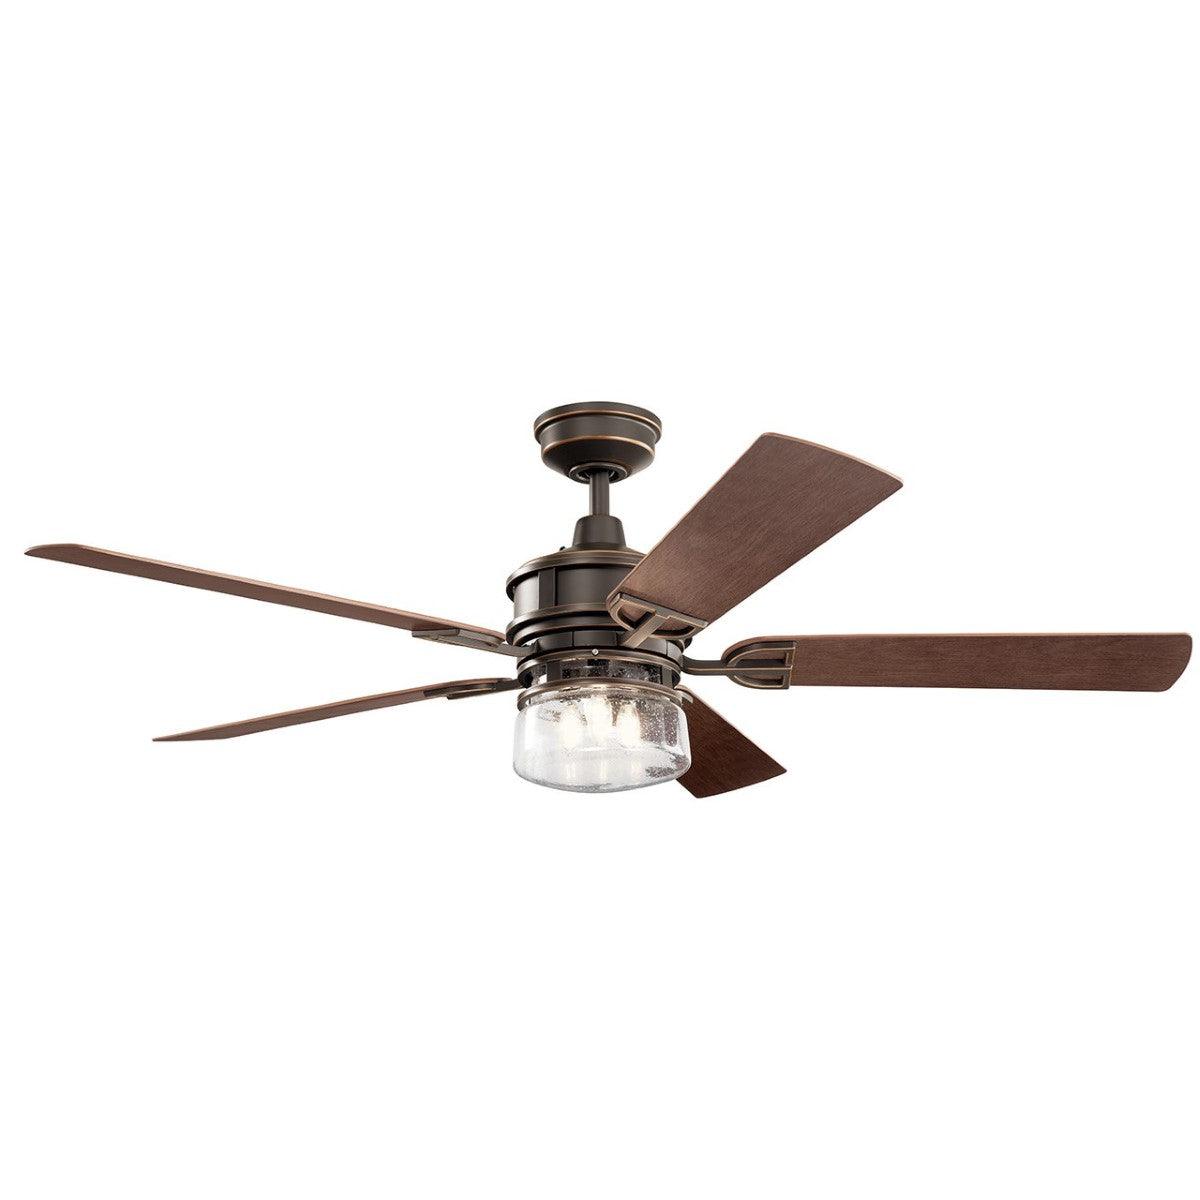 Lyndon 60 Inch Rustic Outdoor Ceiling Fan With Light And Wall Control